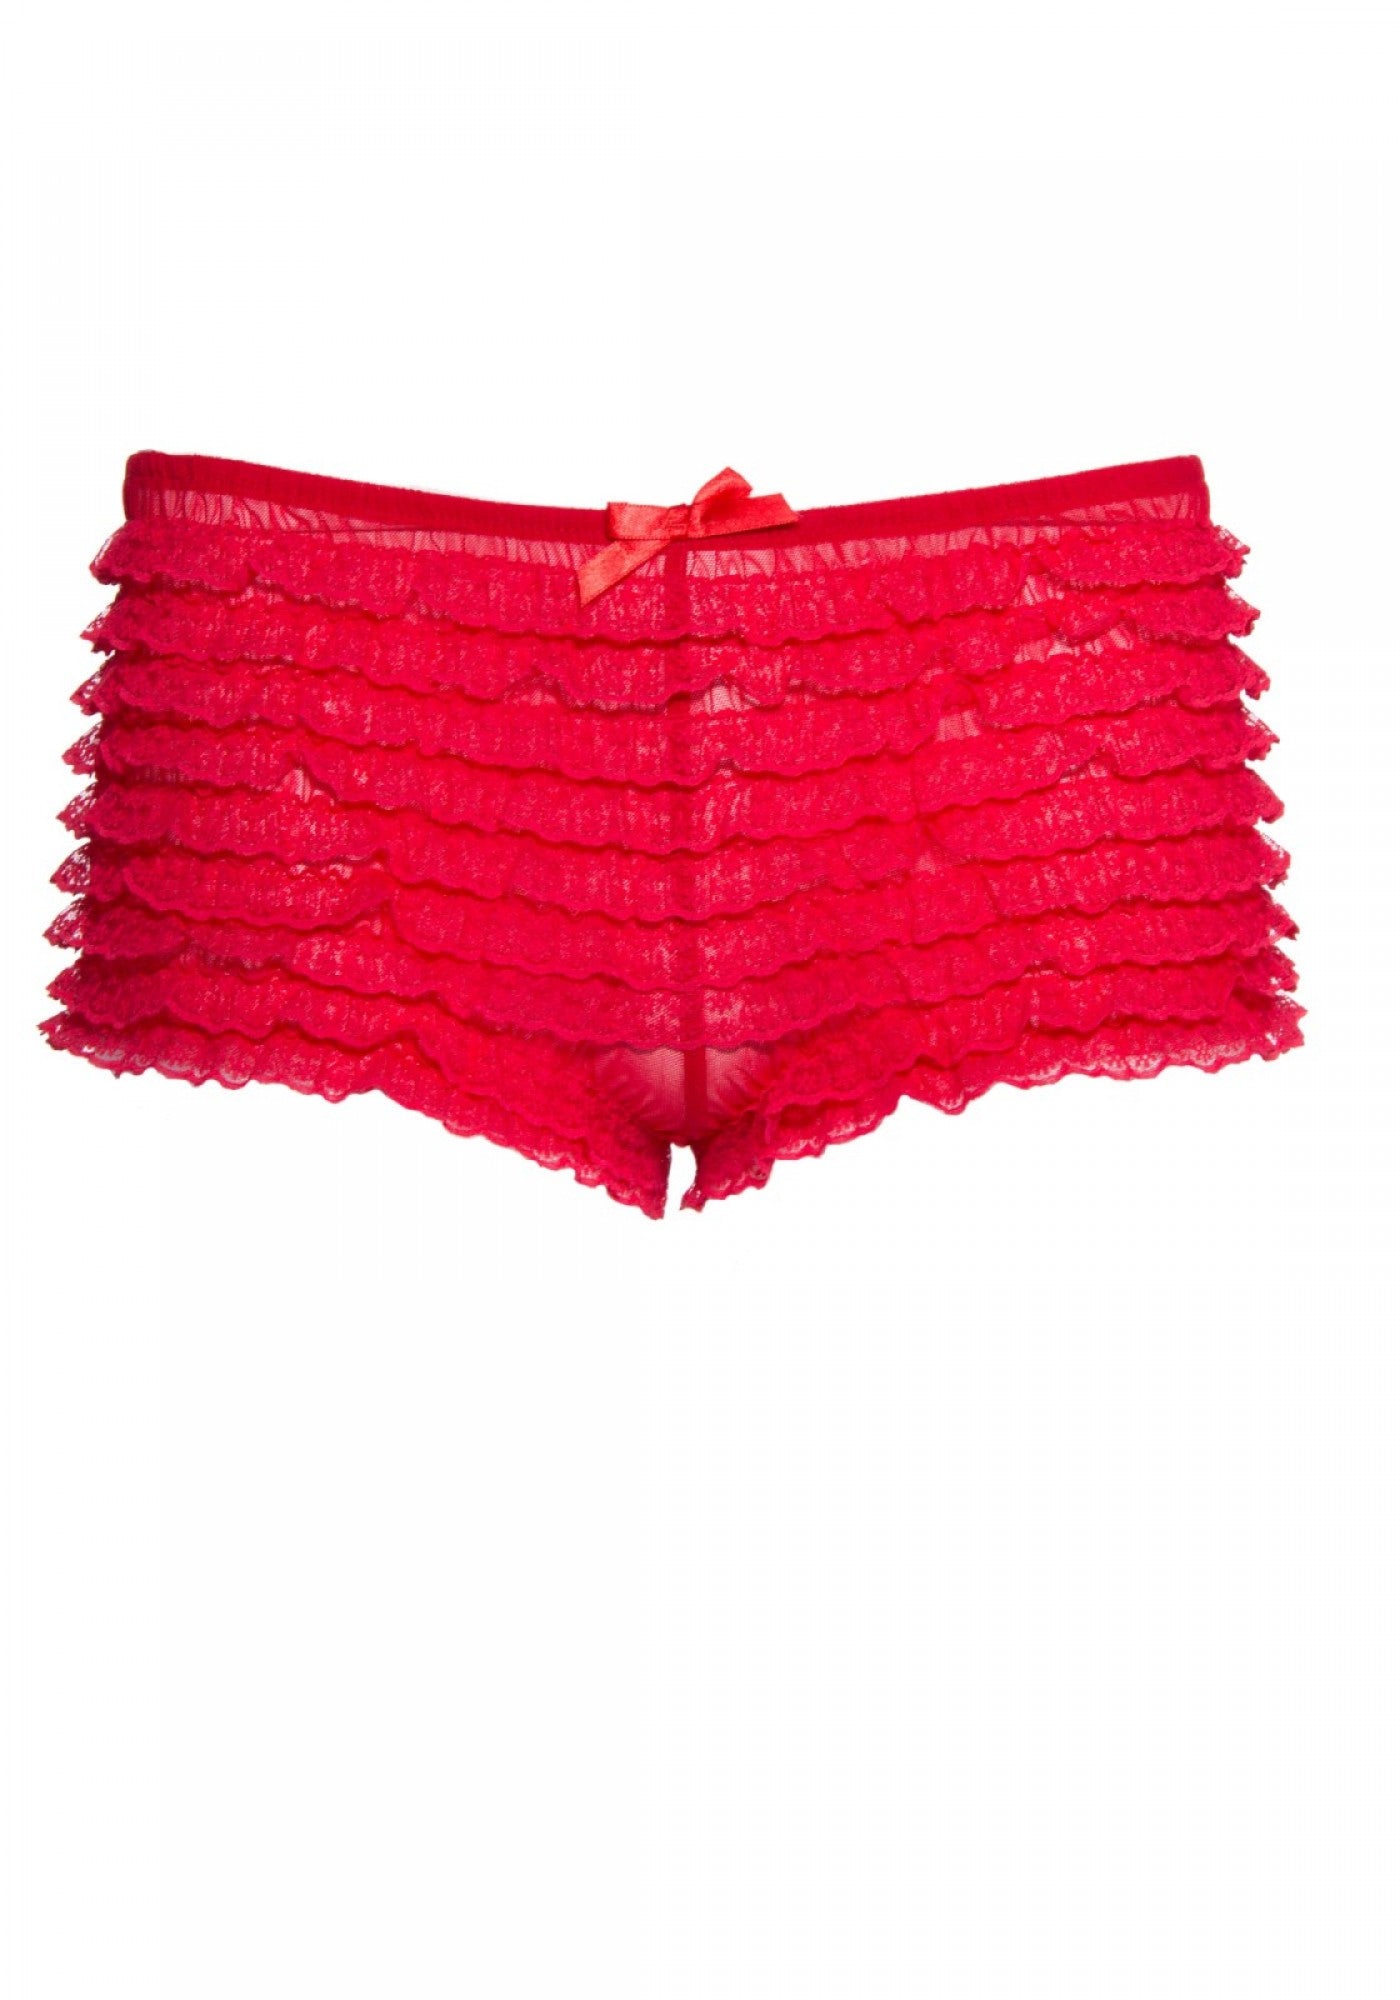 Leg Avenue 2985 Lace Ruffle Tanga Short - red frilly knickers boxer briefs